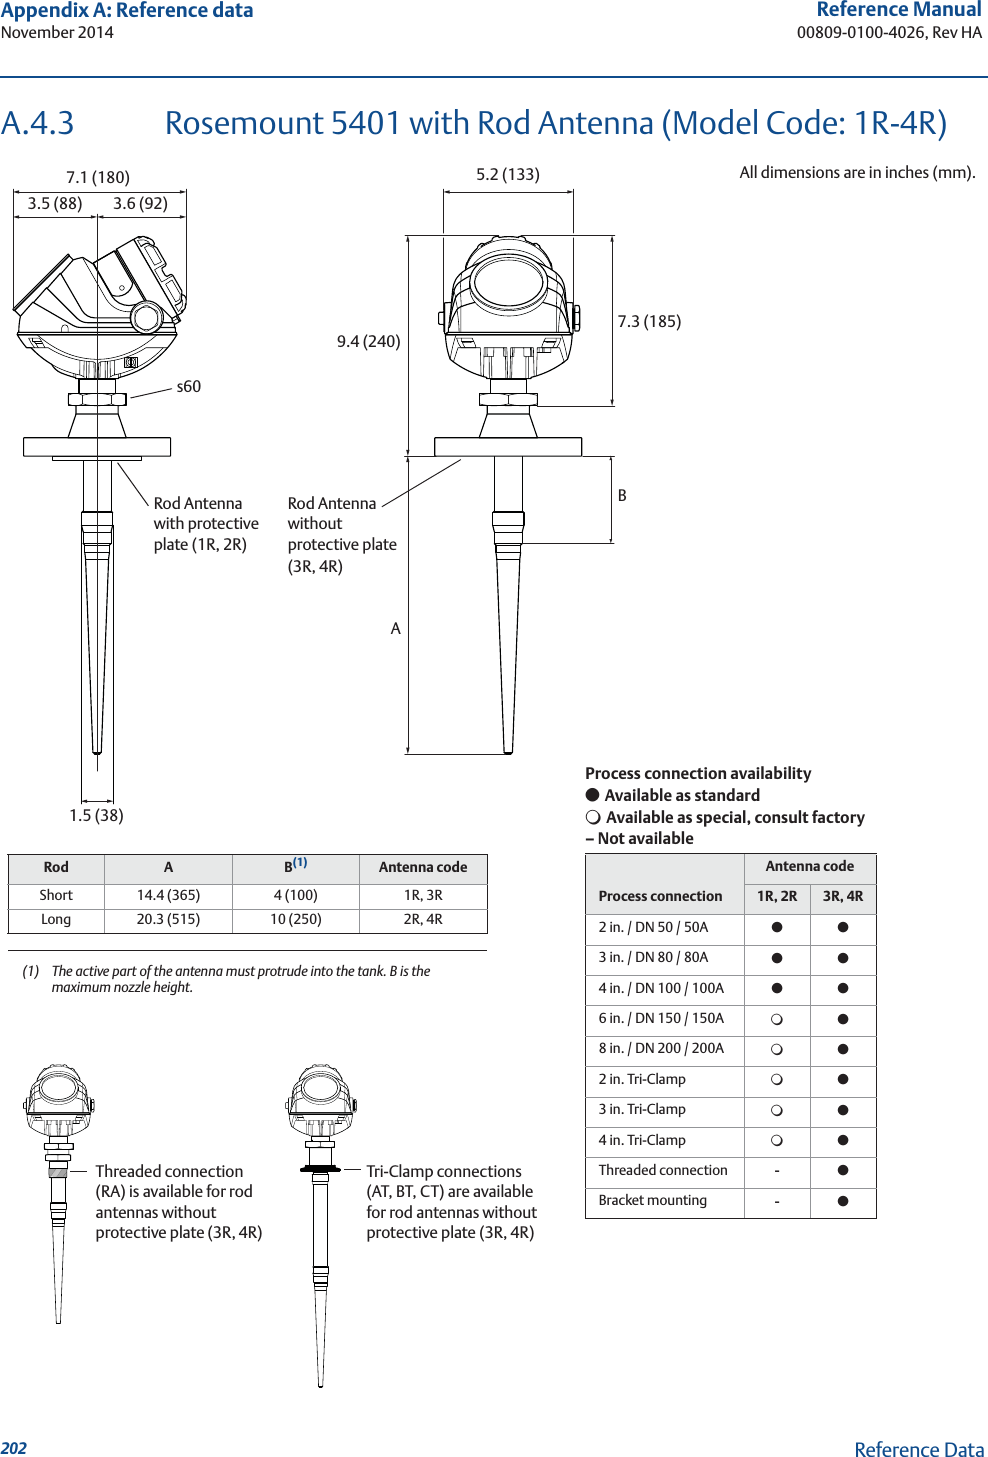 202Reference Manual00809-0100-4026, Rev HAAppendix A: Reference dataNovember 2014Reference DataA.4.3 Rosemount 5401 with Rod Antenna (Model Code: 1R-4R)7.1 (180)3.5 (88) 3.6 (92)s605.2 (133)9.4 (240)7.3 (185)All dimensions are in inches (mm).Rod Antenna with protective plate (1R, 2R)Rod Antenna without protective plate(3R, 4R)BA1.5 (38)Tri-Clamp connections (AT, BT, CT) are available for rod antennas without protective plate (3R, 4R)Rod A B(1)(1) The active part of the antenna must protrude into the tank. B is the maximum nozzle height.Antenna codeShort 14.4 (365) 4 (100) 1R, 3RLong 20.3 (515) 10 (250) 2R, 4RProcess connection availability● Available as standard❍ Available as special, consult factory– Not availableProcess connectionAntenna code1R, 2R 3R, 4R2 in. / DN 50 / 50A ●●3 in. / DN 80 / 80A ●●4 in. / DN 100 / 100A ●●6 in. / DN 150 / 150A ❍●8 in. / DN 200 / 200A ❍●2 in. Tri-Clamp ❍●3 in. Tri-Clamp ❍●4 in. Tri-Clamp ❍●Threaded connection -●Bracket mounting -●Threaded connection (RA) is available for rod antennas without protective plate (3R, 4R)